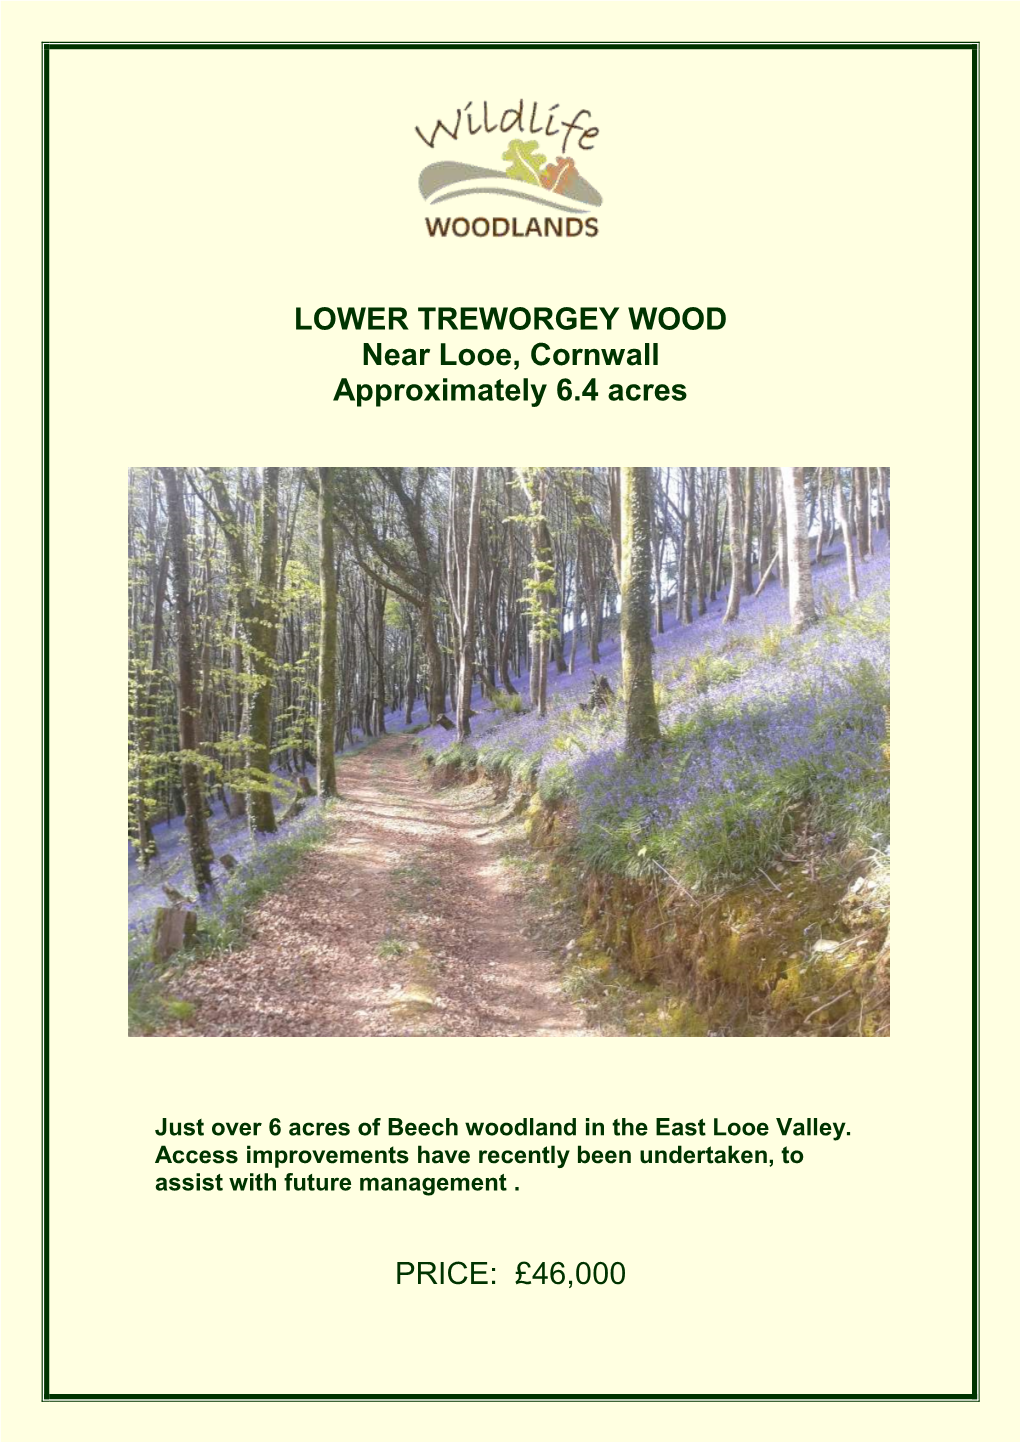 LOWER TREWORGEY WOOD Near Looe, Cornwall Approximately 6.4 Acres